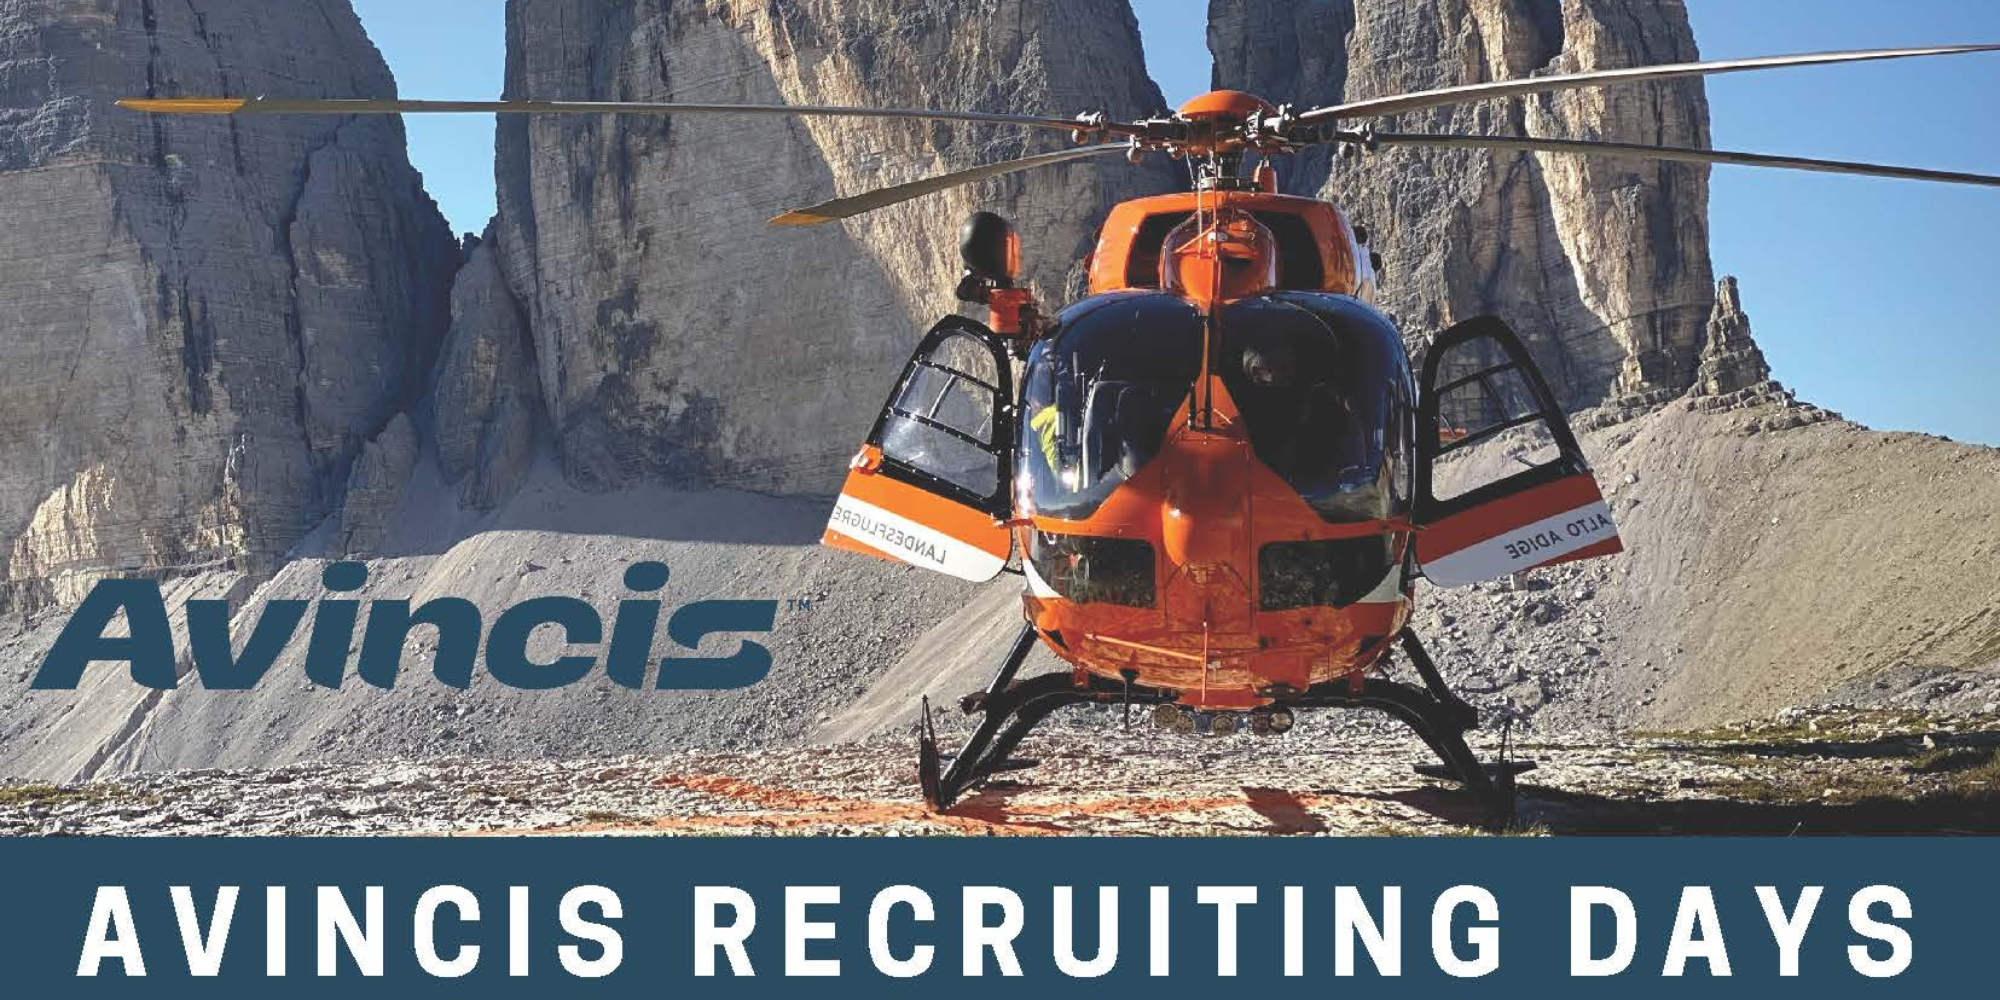 Avincis <br> Recruiting Days <br> in Italfly